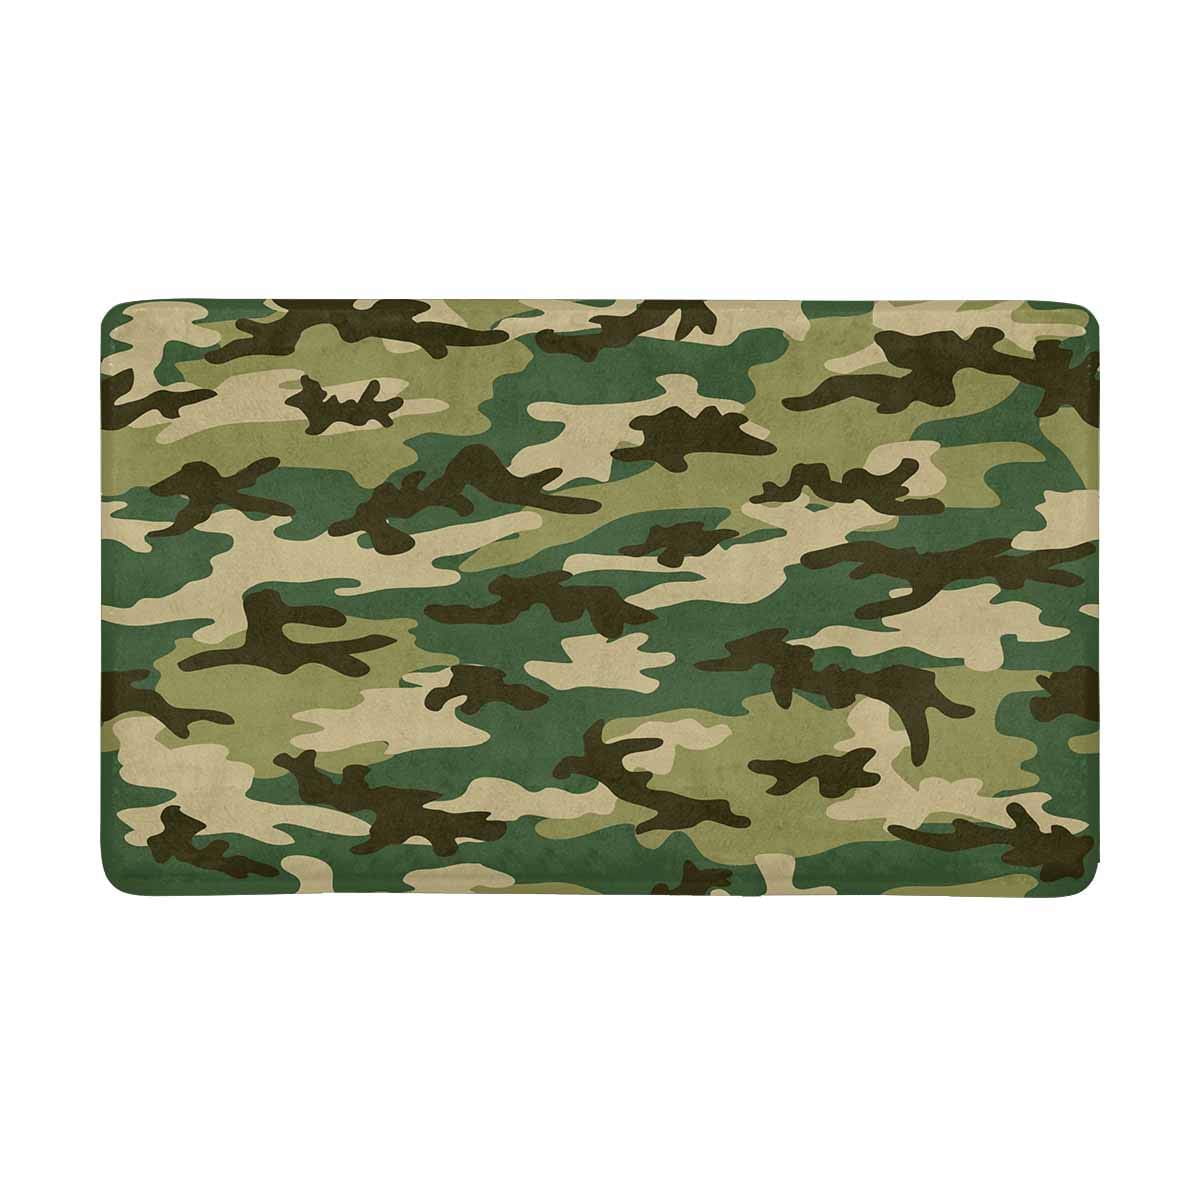 POP Military and Hunting Camouflage Doormat Non-Slip Indoor and Outdoor ...